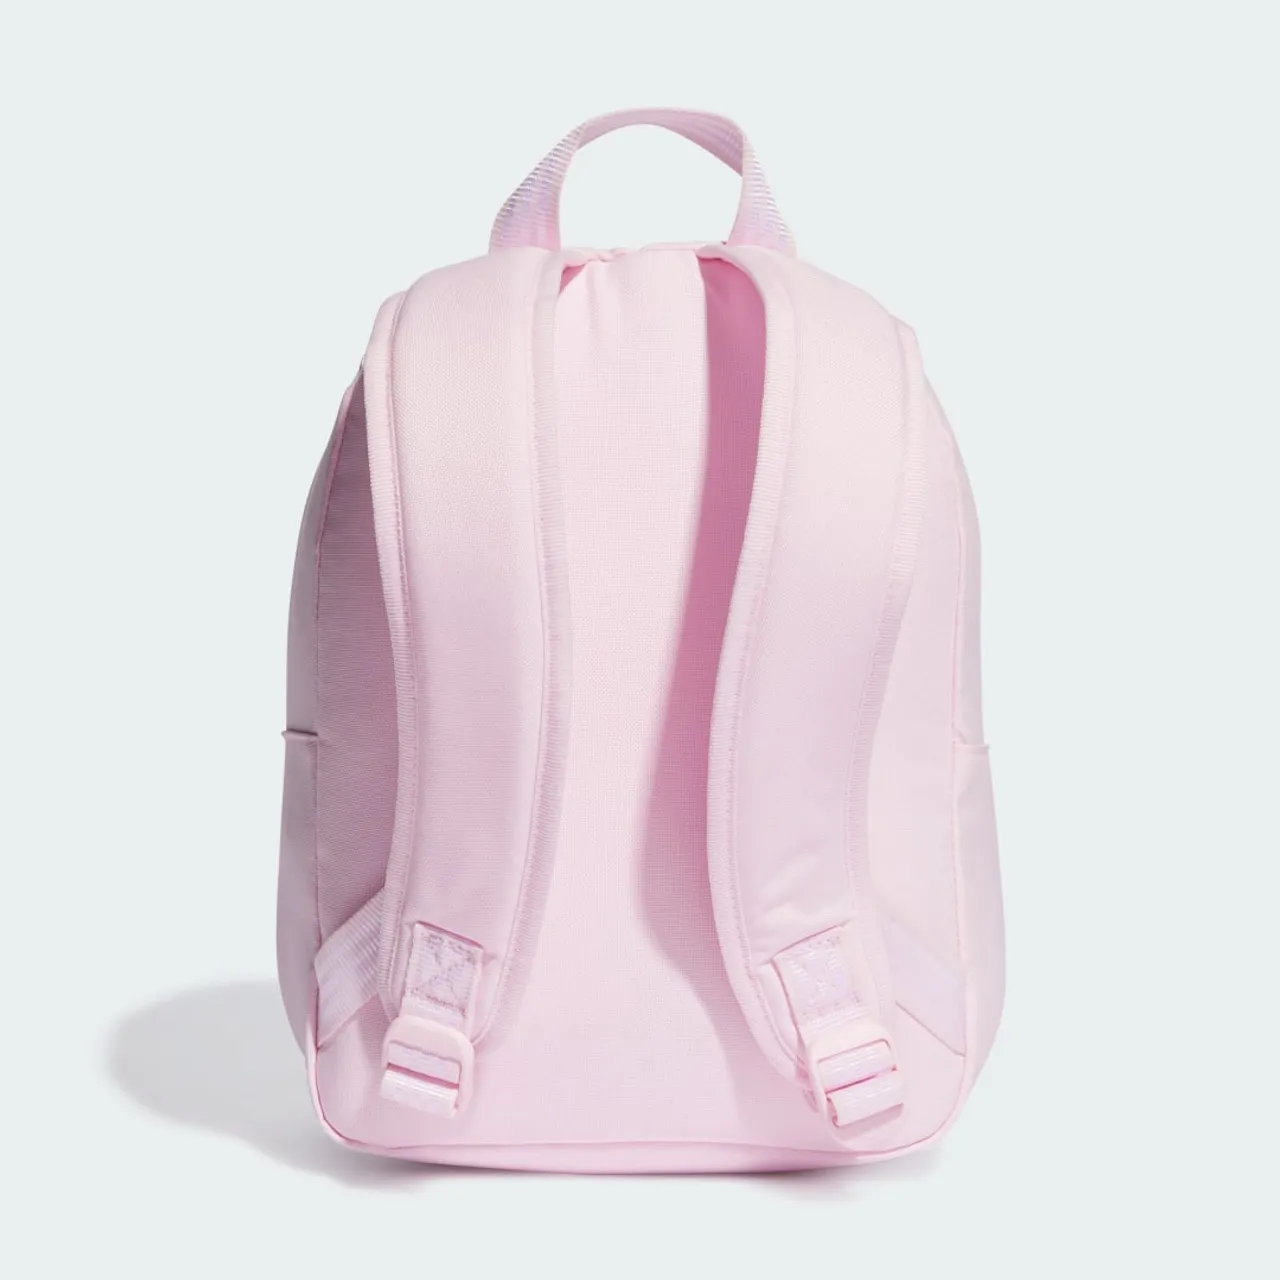 Small Adicolor Classic Backpack